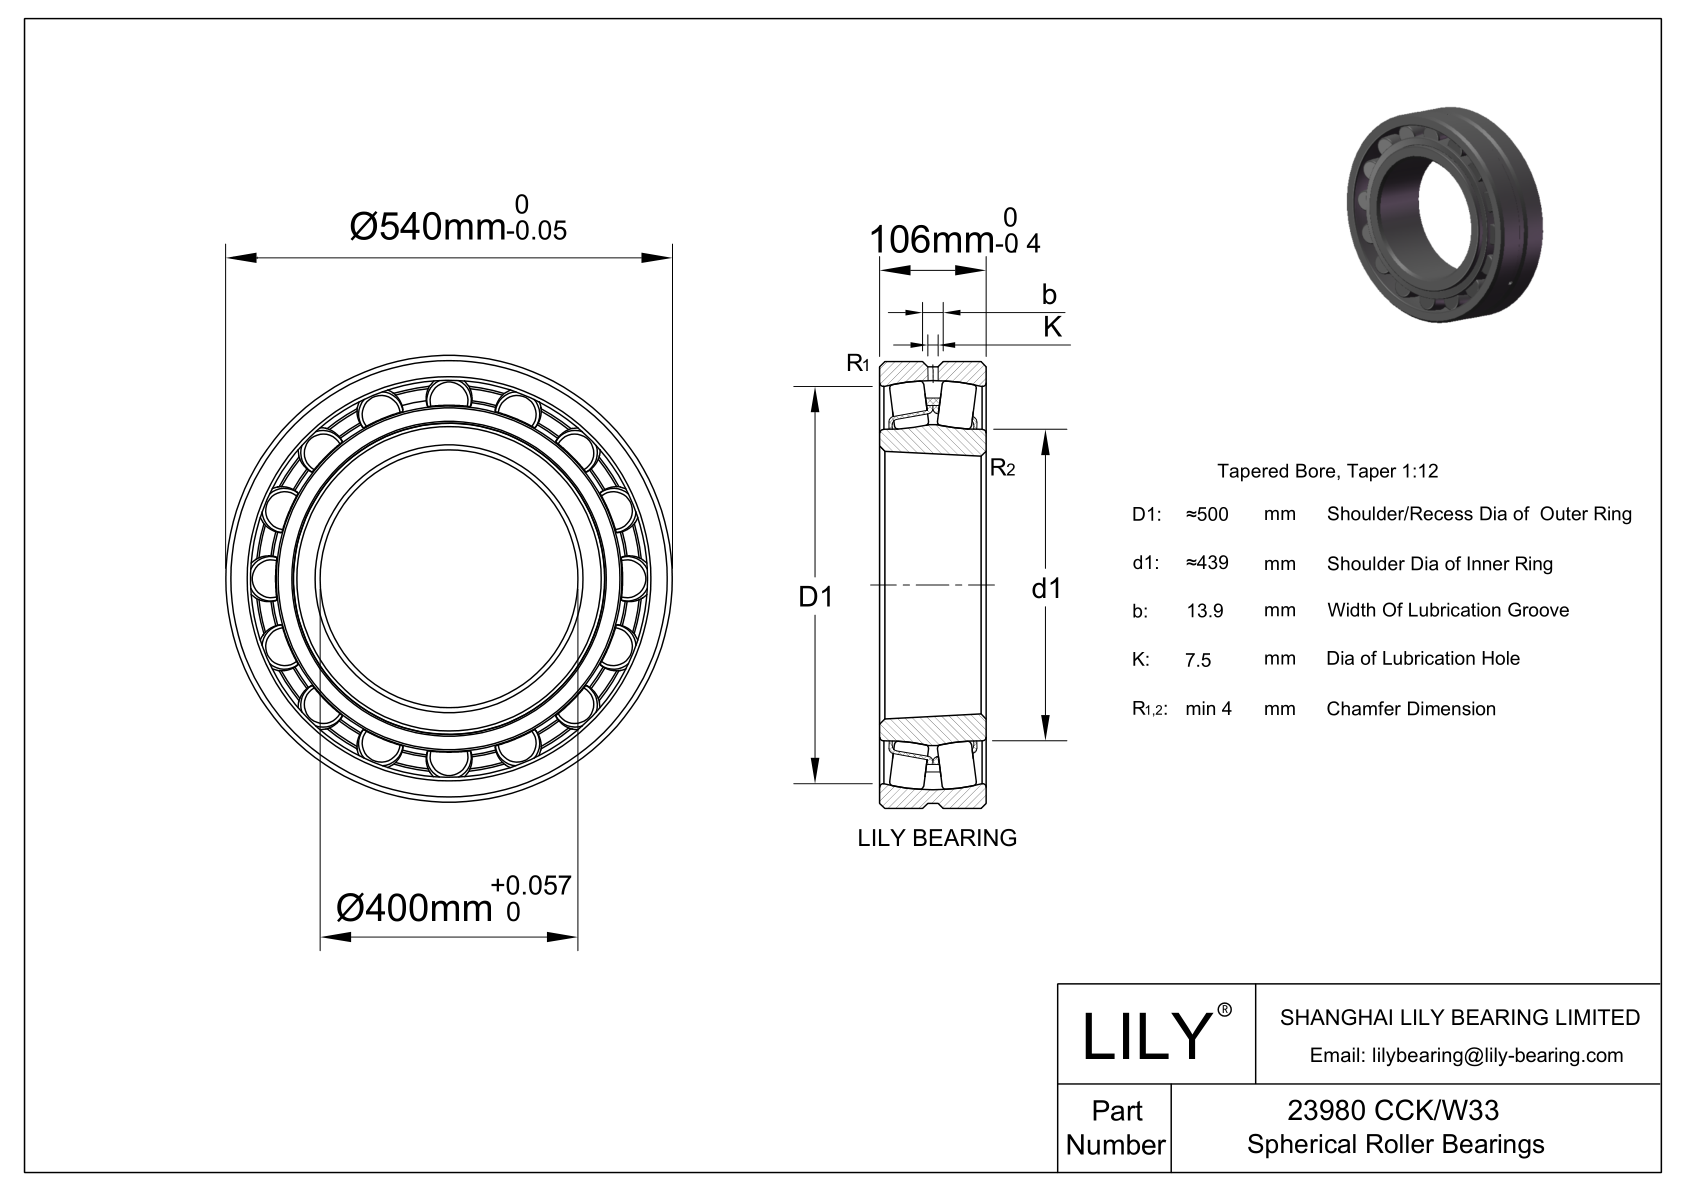 23980 CCK/W33 Double Row Spherical Roller Bearing cad drawing